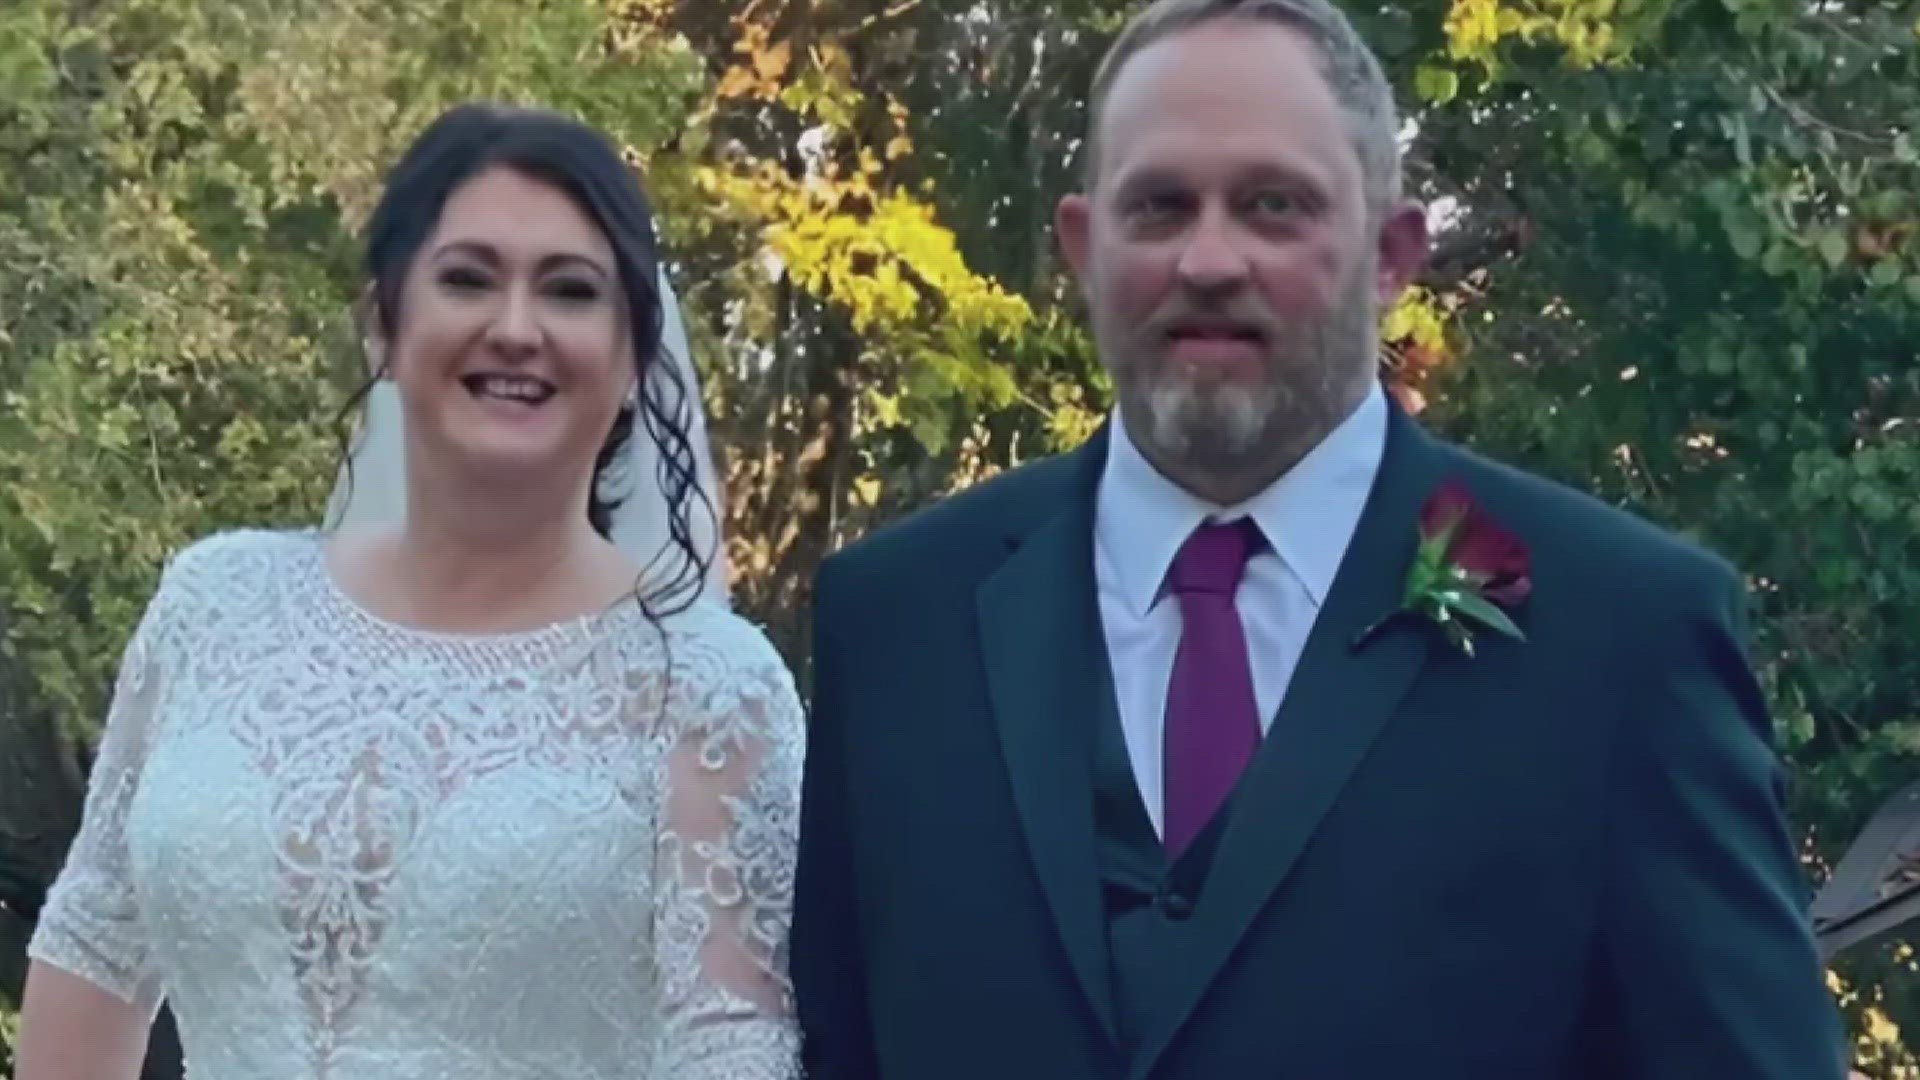 The friends of a Bridge City man are working to raise money to help his wife as she navigates life without him following a deadly Louisiana wreck.